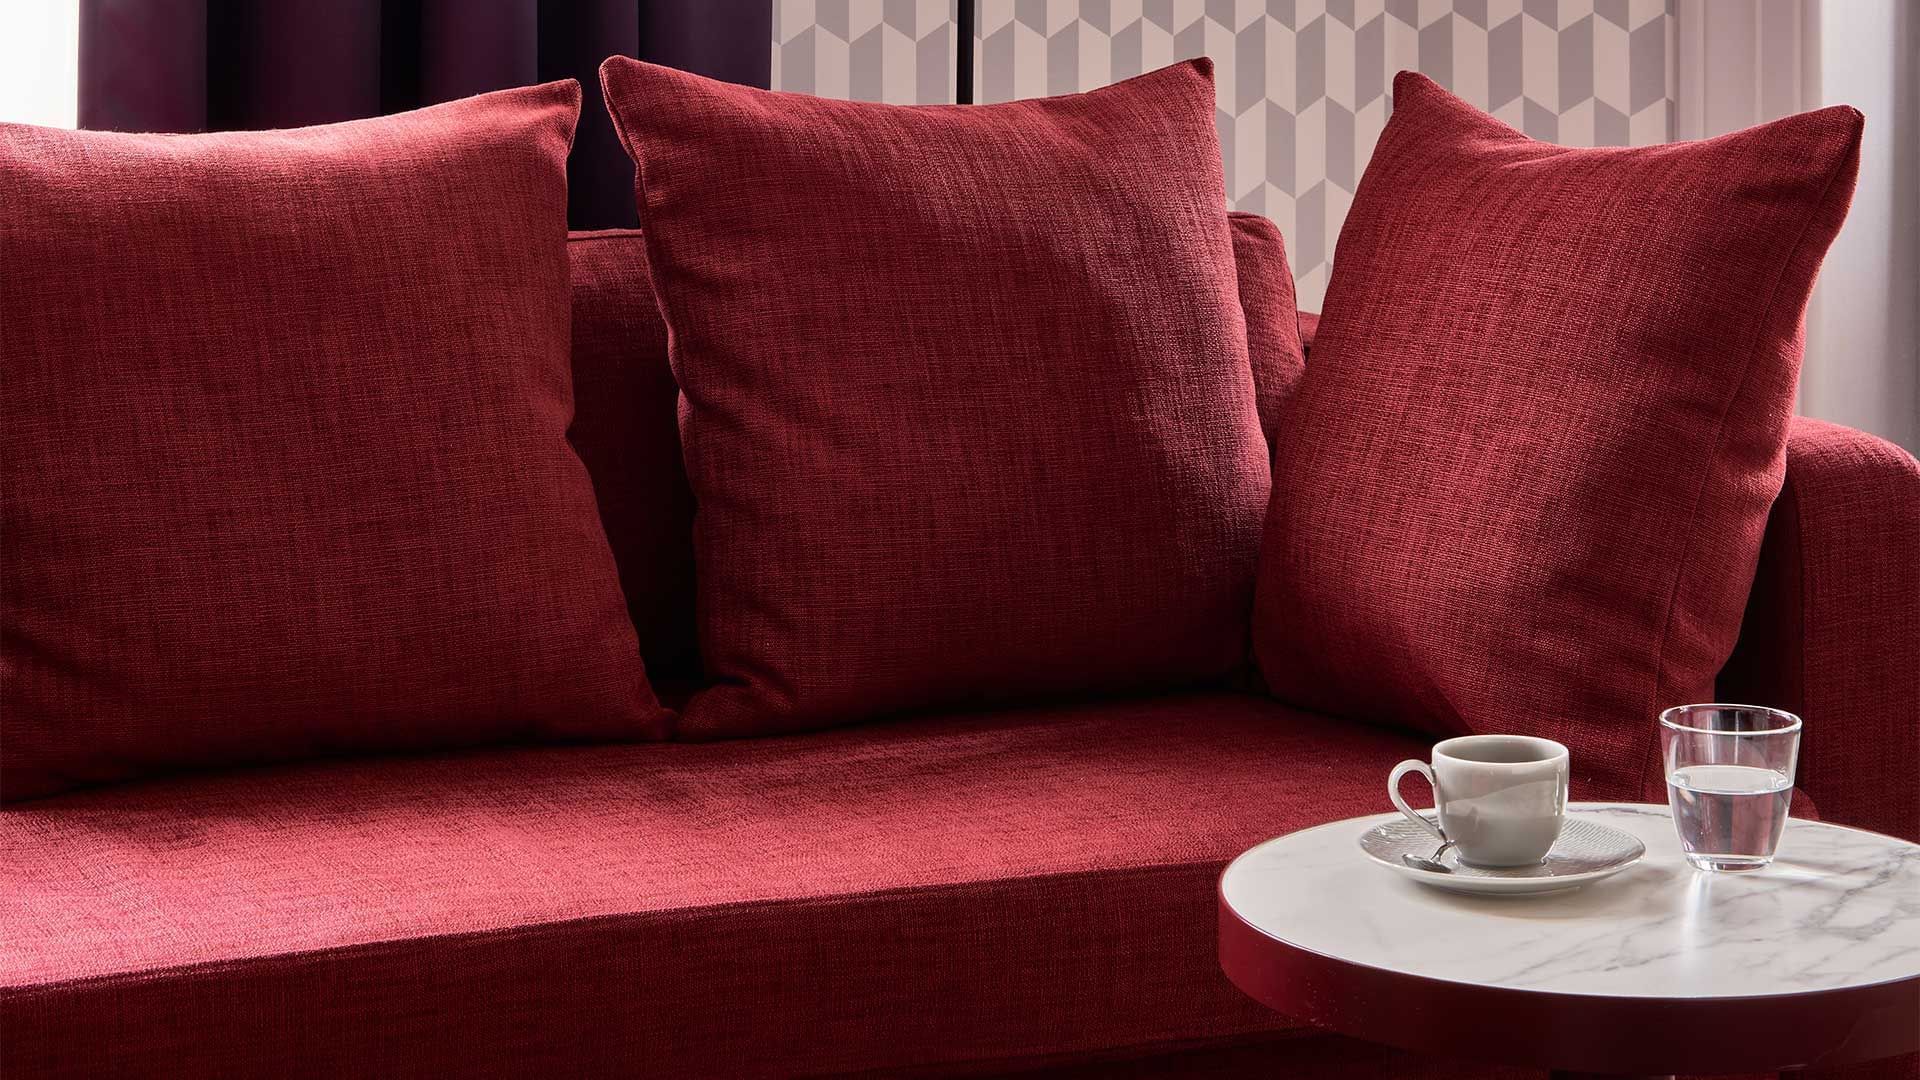 Red Lounge chair in Deluxe Room at Falkensteiner Hotels